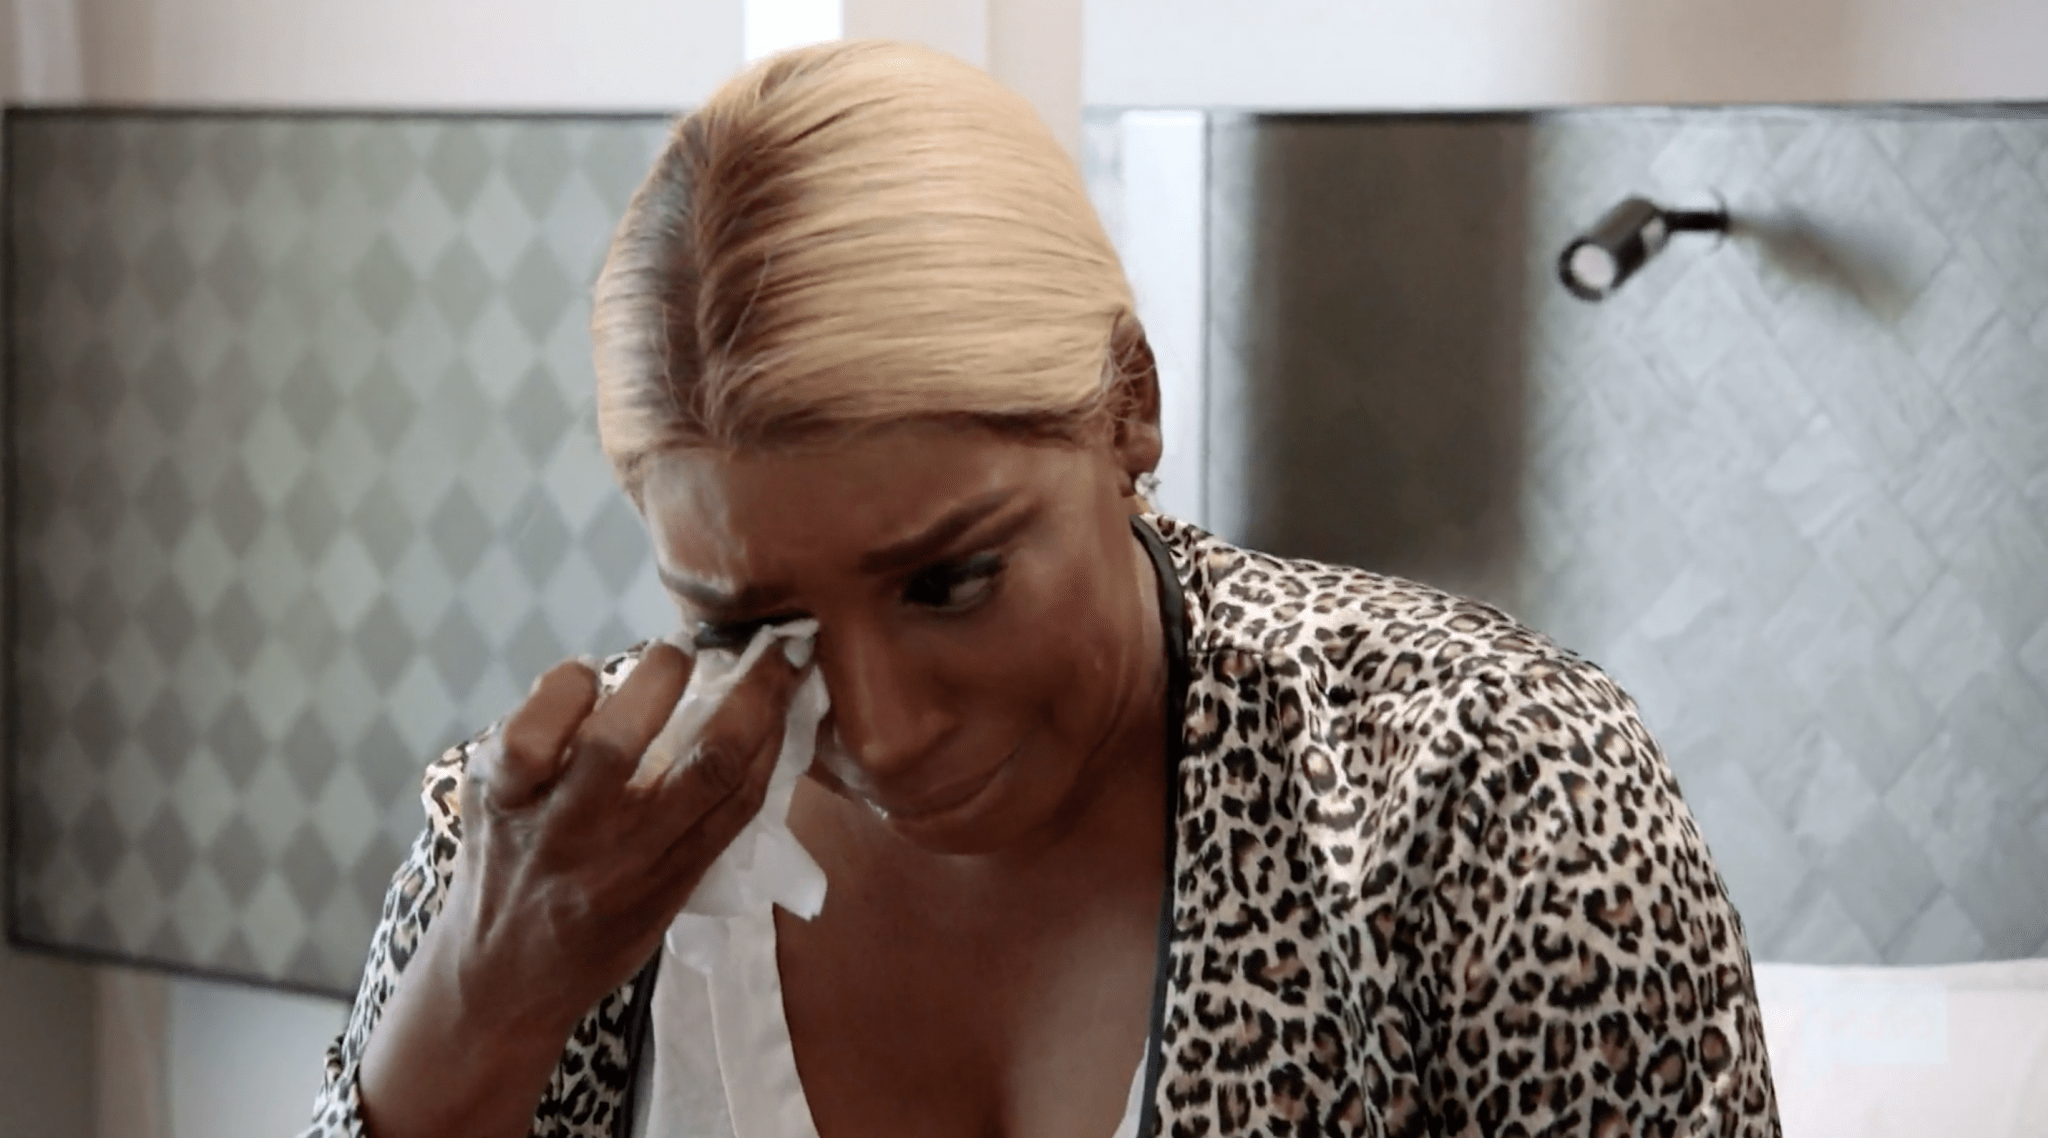 NeNe Leakes Talks Openly About Cancer And Its Effects On Her Marriage - Here's The Video